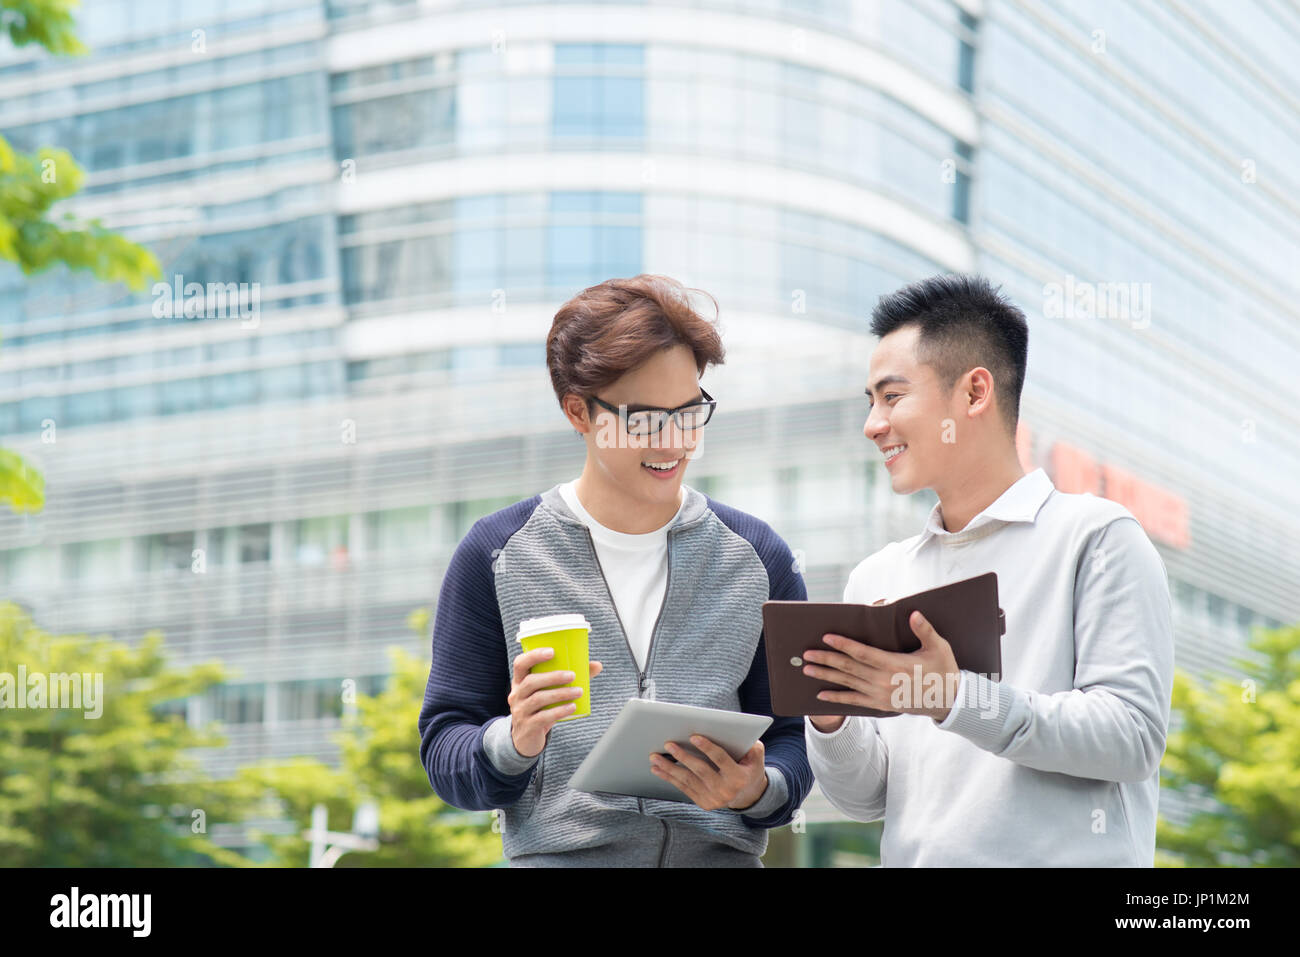 Coffee break. Two cheerful business men talking while one of them holding coffee cup Stock Photo